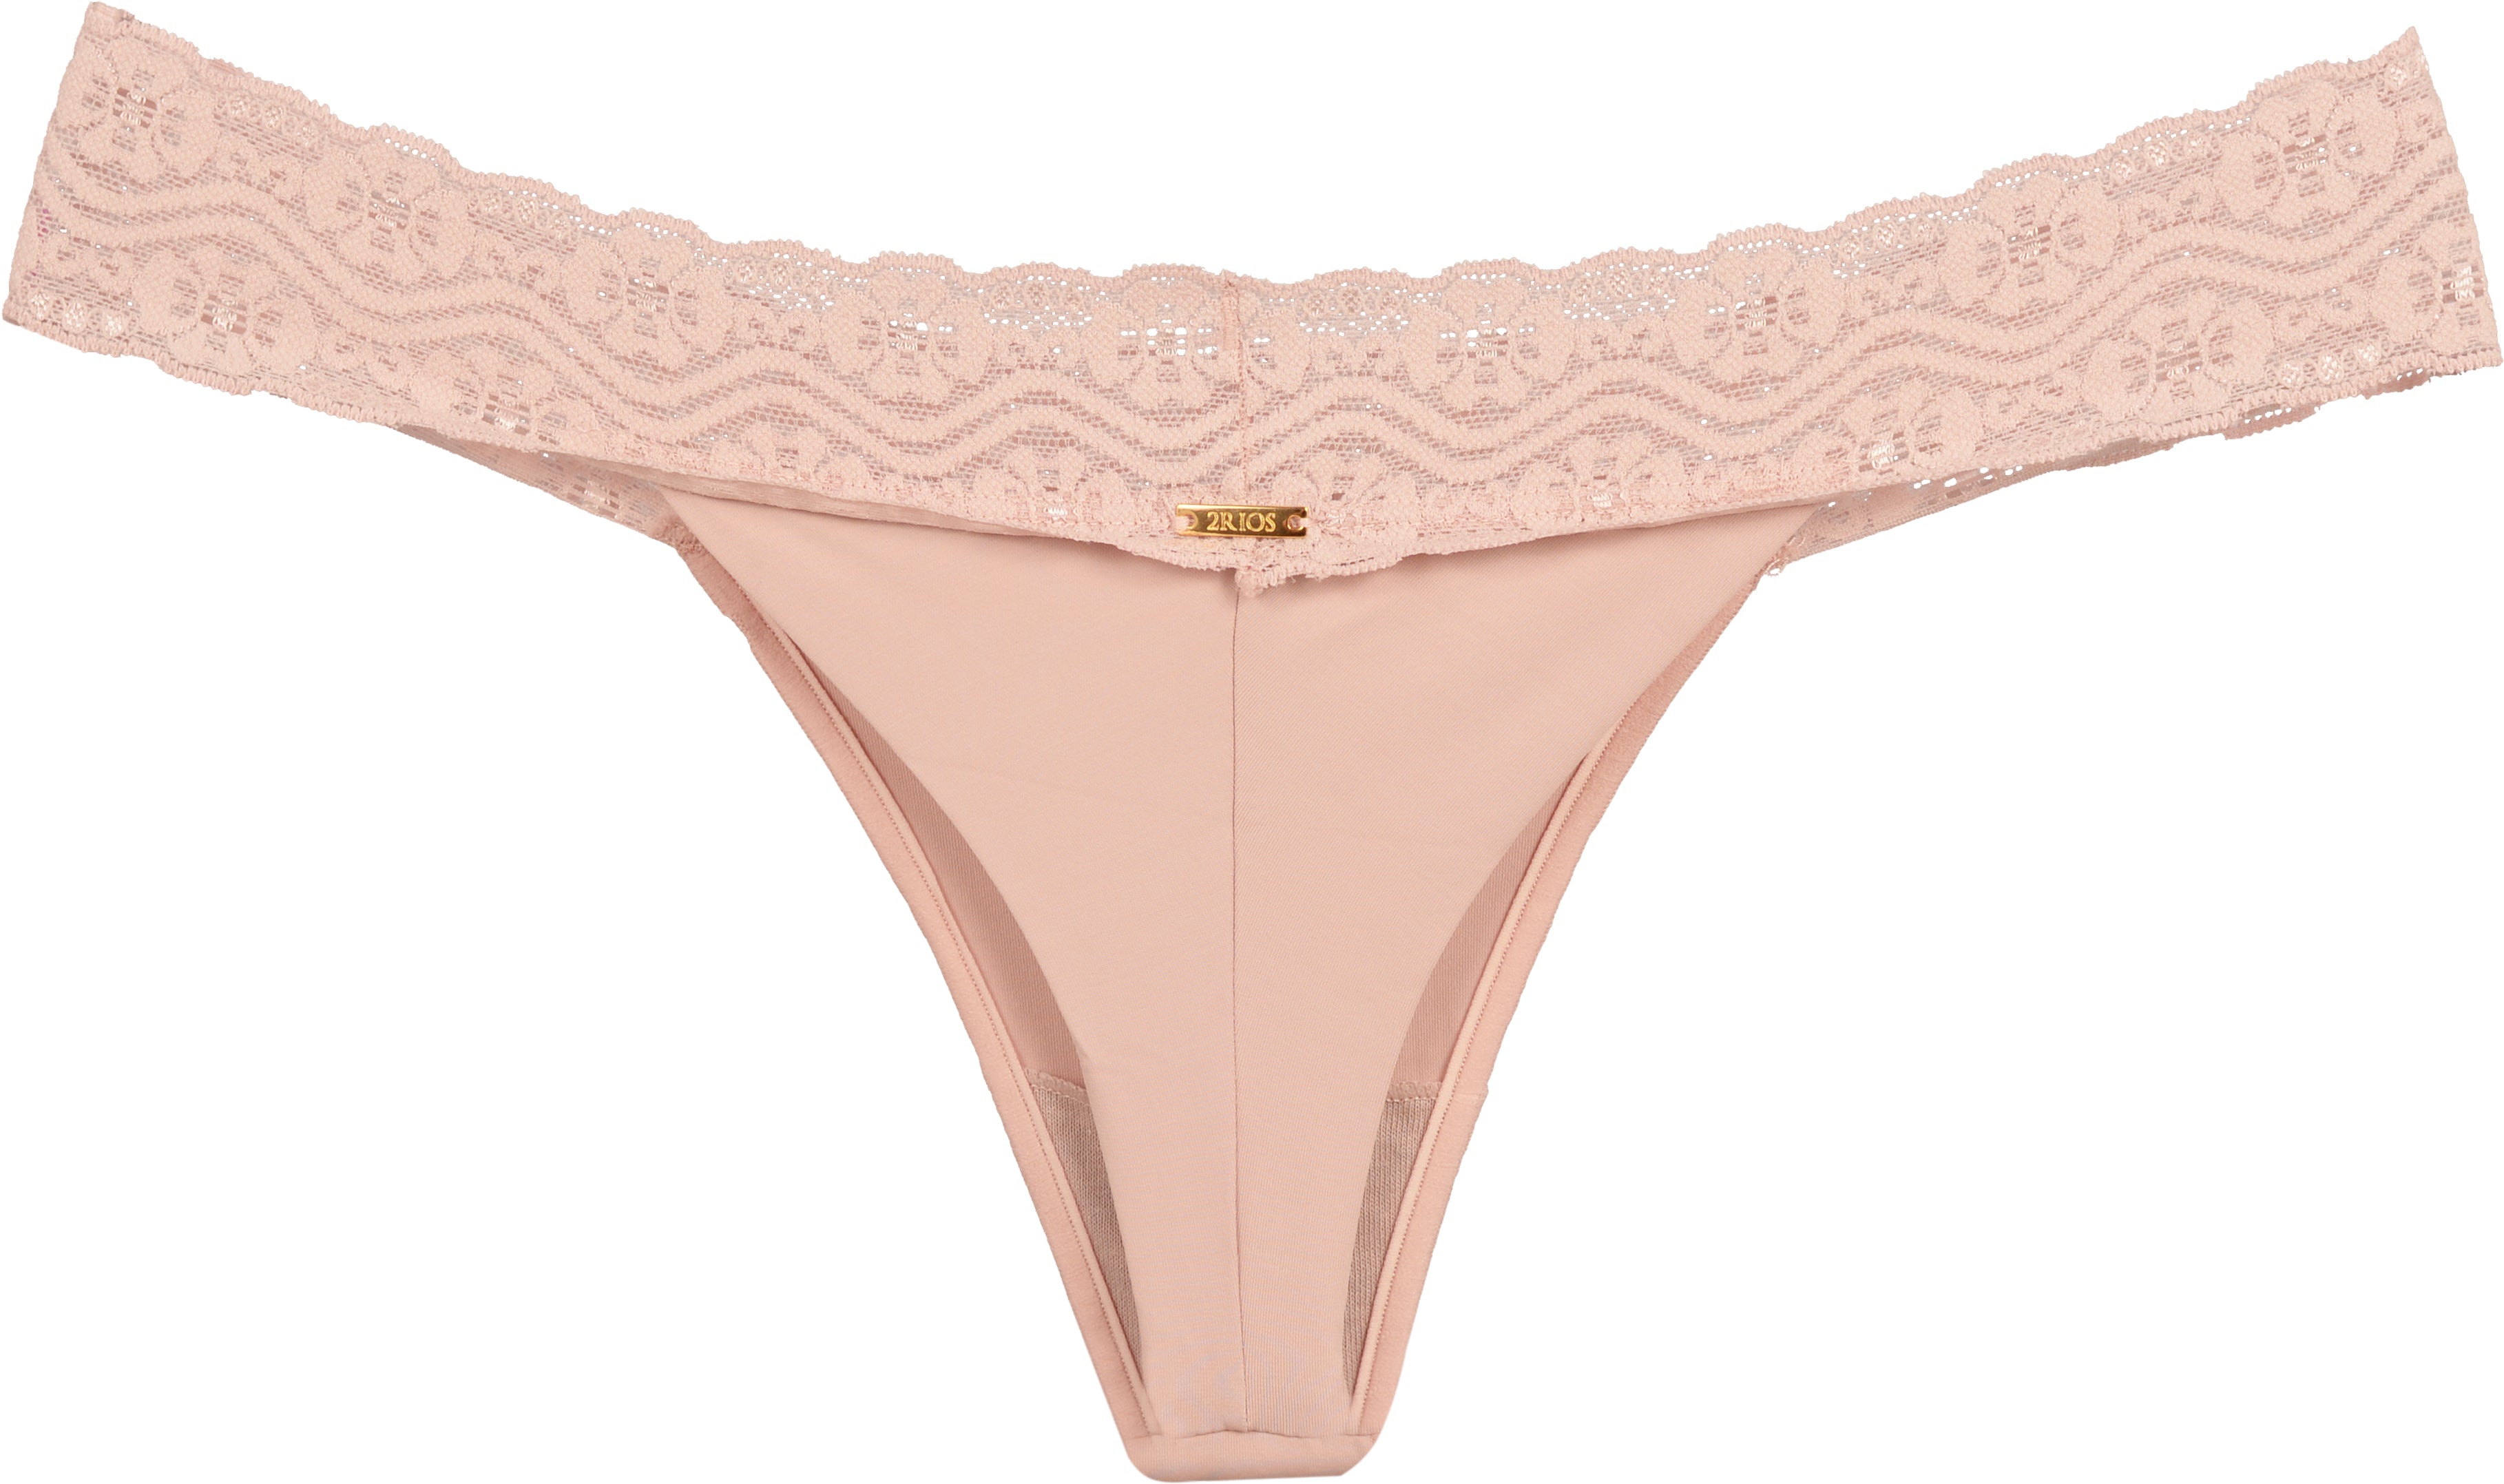 Brand New Auth Miniso Thong Panty / Forever 21 Ruffle Trim Thong Panty